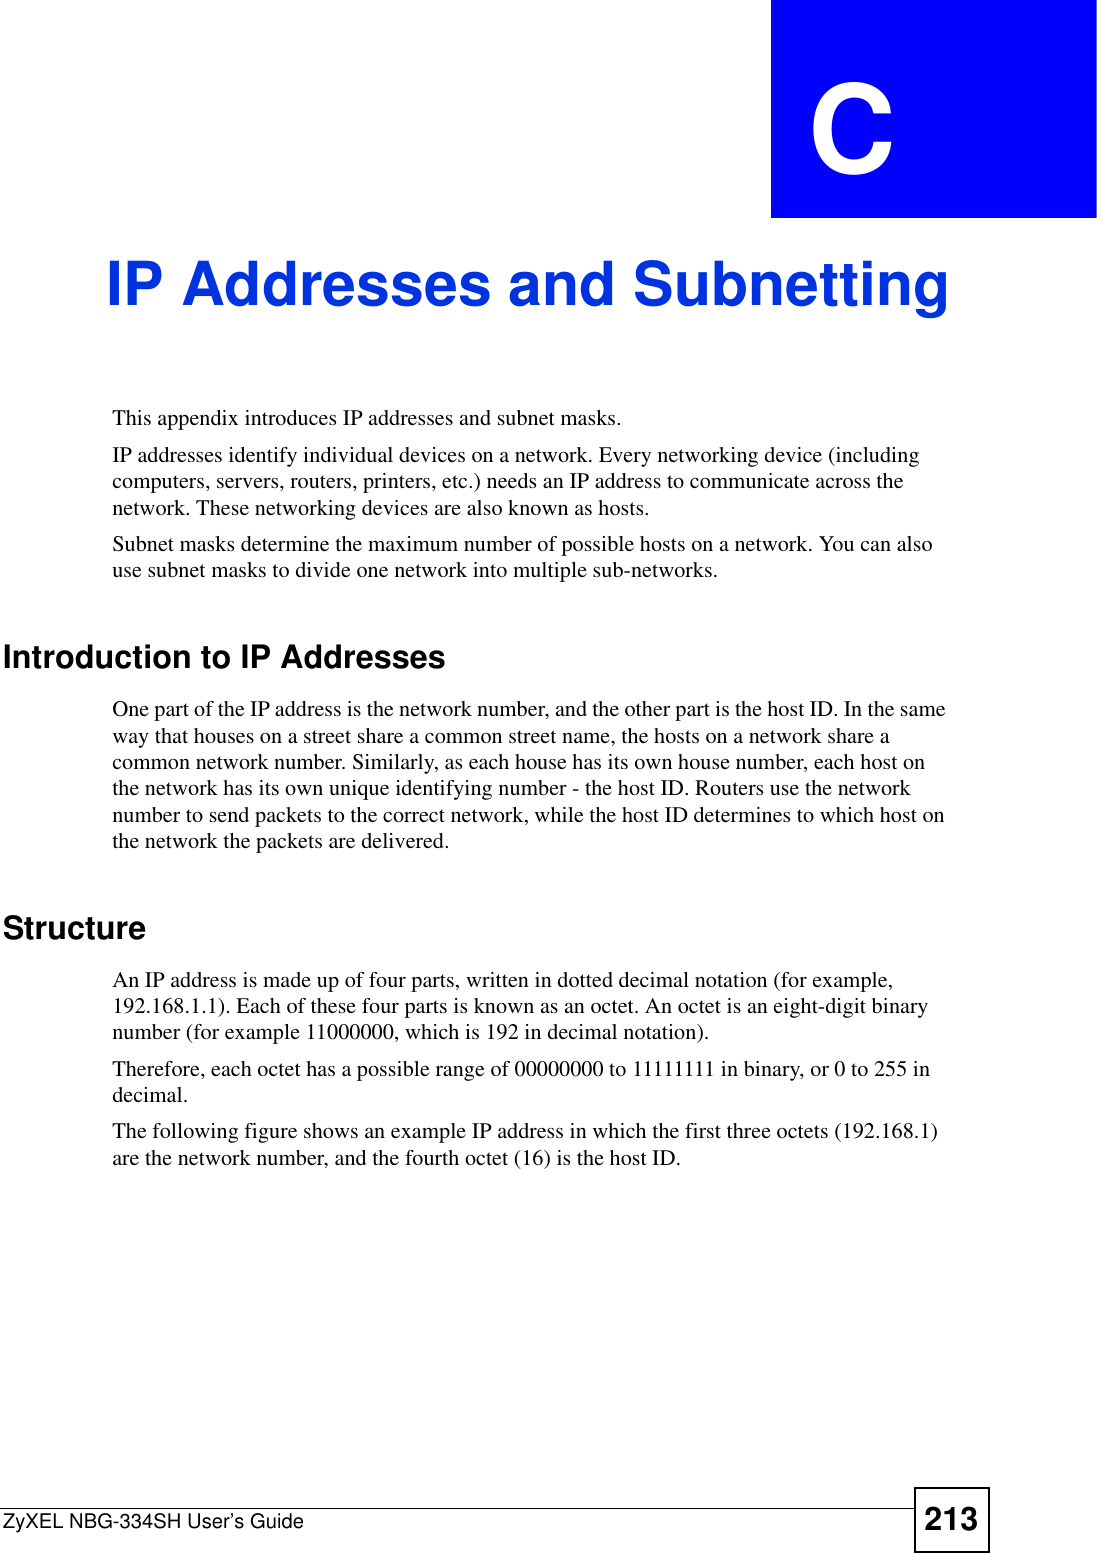 ZyXEL NBG-334SH User’s Guide 213APPENDIX  C IP Addresses and SubnettingThis appendix introduces IP addresses and subnet masks. IP addresses identify individual devices on a network. Every networking device (including computers, servers, routers, printers, etc.) needs an IP address to communicate across the network. These networking devices are also known as hosts.Subnet masks determine the maximum number of possible hosts on a network. You can also use subnet masks to divide one network into multiple sub-networks.Introduction to IP AddressesOne part of the IP address is the network number, and the other part is the host ID. In the same way that houses on a street share a common street name, the hosts on a network share a common network number. Similarly, as each house has its own house number, each host on the network has its own unique identifying number - the host ID. Routers use the network number to send packets to the correct network, while the host ID determines to which host on the network the packets are delivered.StructureAn IP address is made up of four parts, written in dotted decimal notation (for example, 192.168.1.1). Each of these four parts is known as an octet. An octet is an eight-digit binary number (for example 11000000, which is 192 in decimal notation). Therefore, each octet has a possible range of 00000000 to 11111111 in binary, or 0 to 255 in decimal.The following figure shows an example IP address in which the first three octets (192.168.1) are the network number, and the fourth octet (16) is the host ID.